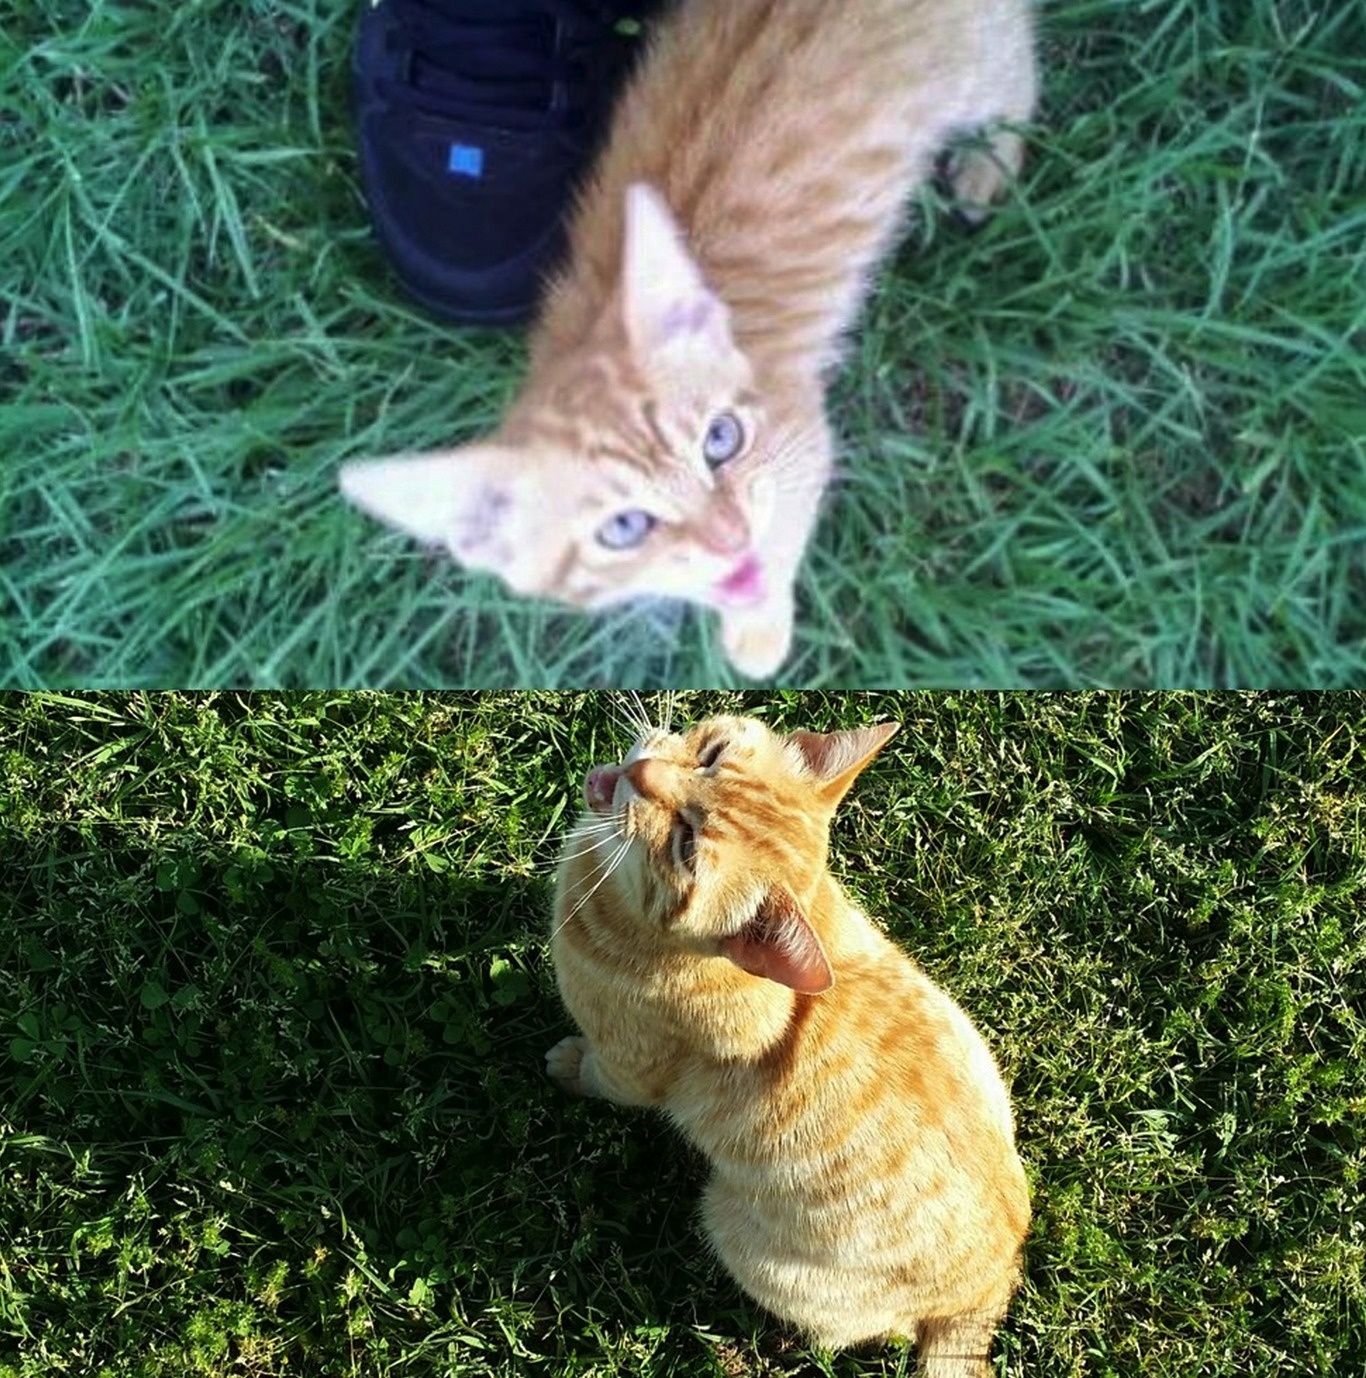 "We had to put down Simba today. Here's the first picture I took of him and one of the last."